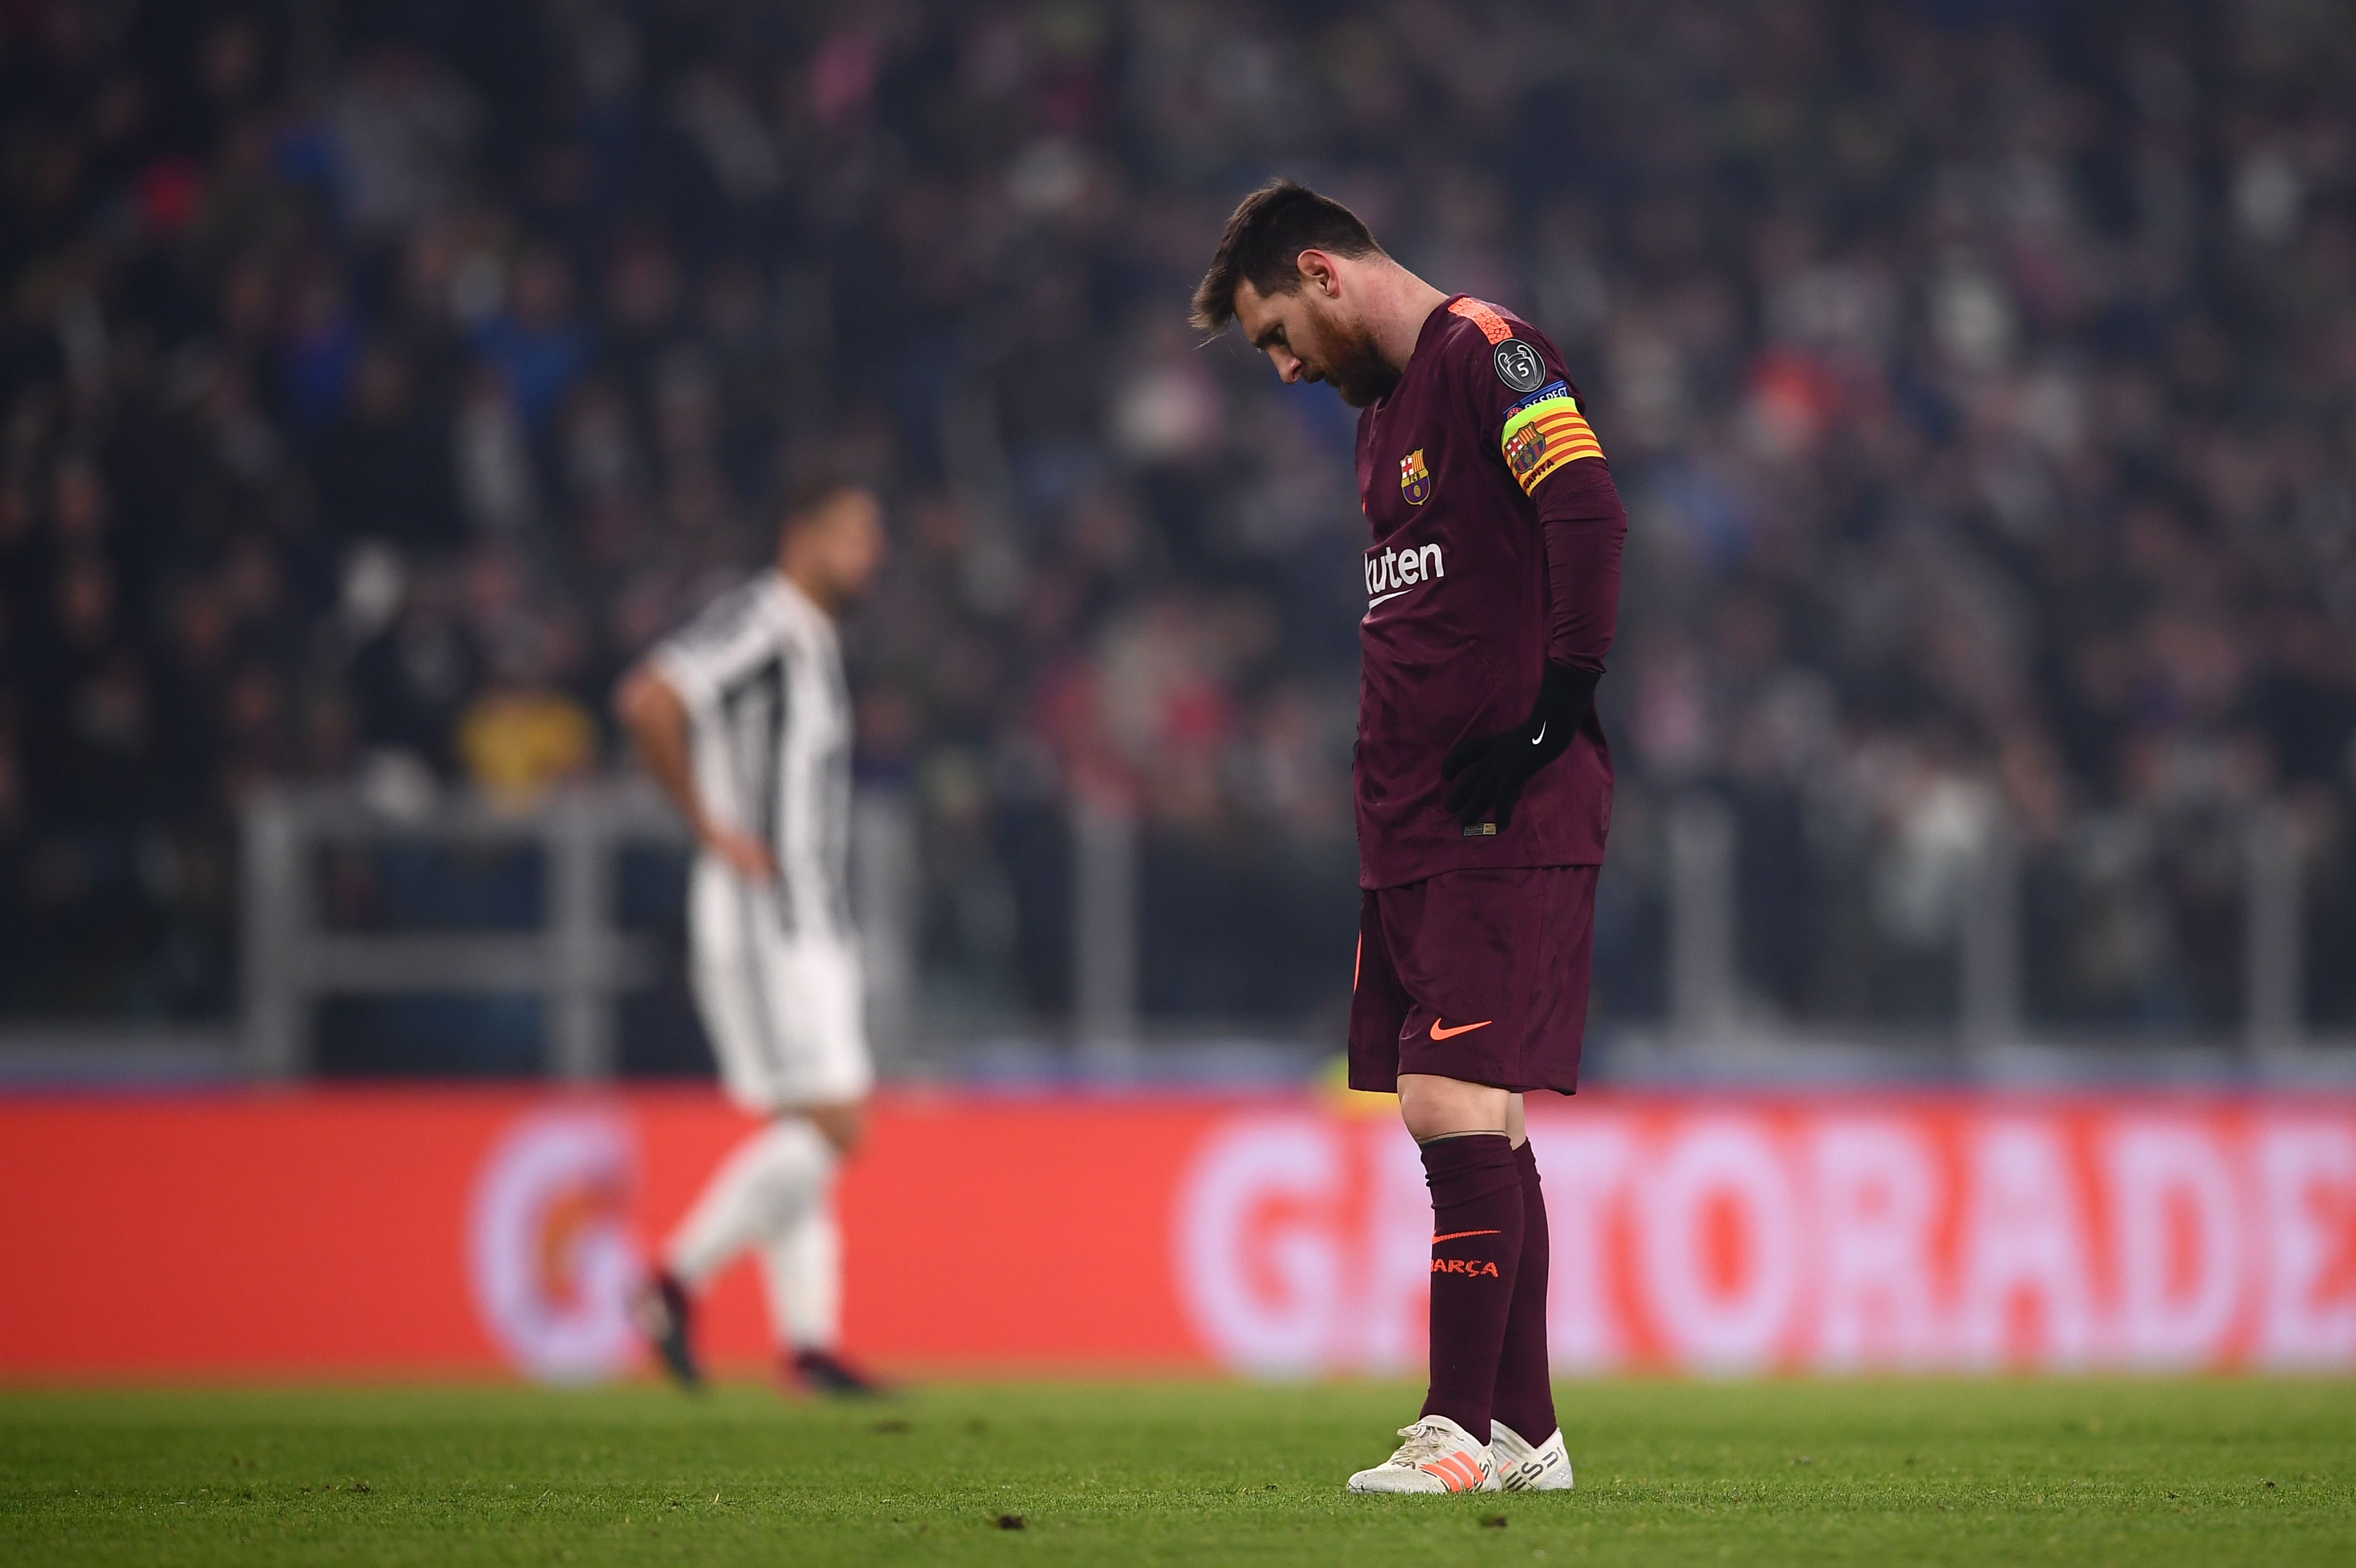 Barcelona's Argentinian forward Lionel Messi reacts during the UEFA Champions League Group D football match Juventus Barcelona on November 22, 2017 at the Juventus stadium in Turin.  / AFP PHOTO / Marco BERTORELLO        (Photo credit should read MARCO BERTORELLO/AFP/Getty Images)